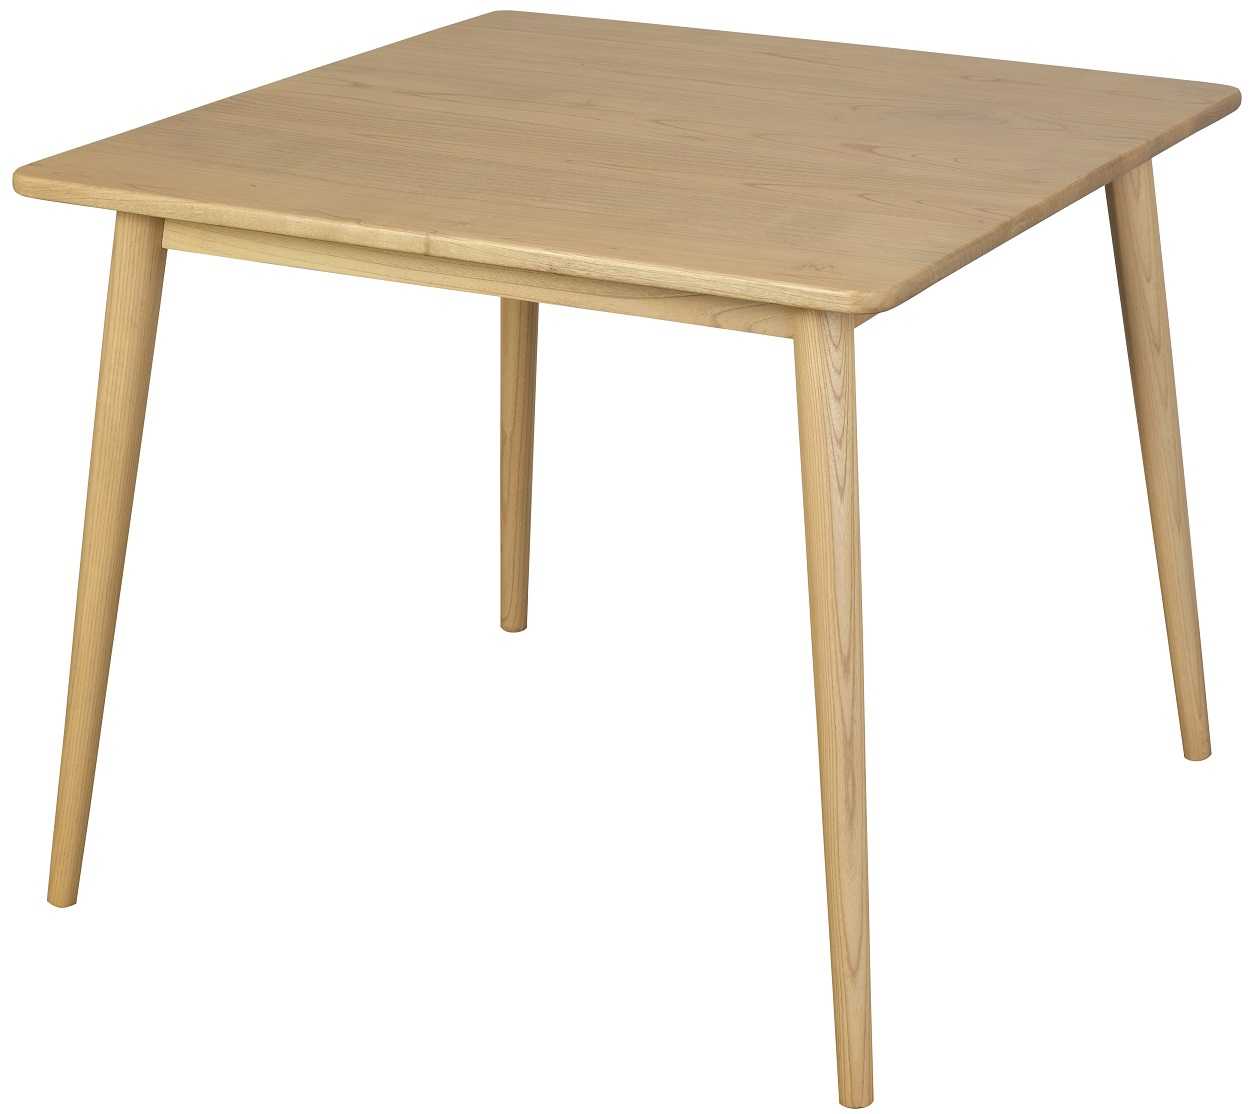 CT Nobu Oak Square Dining Table in Natural Finish